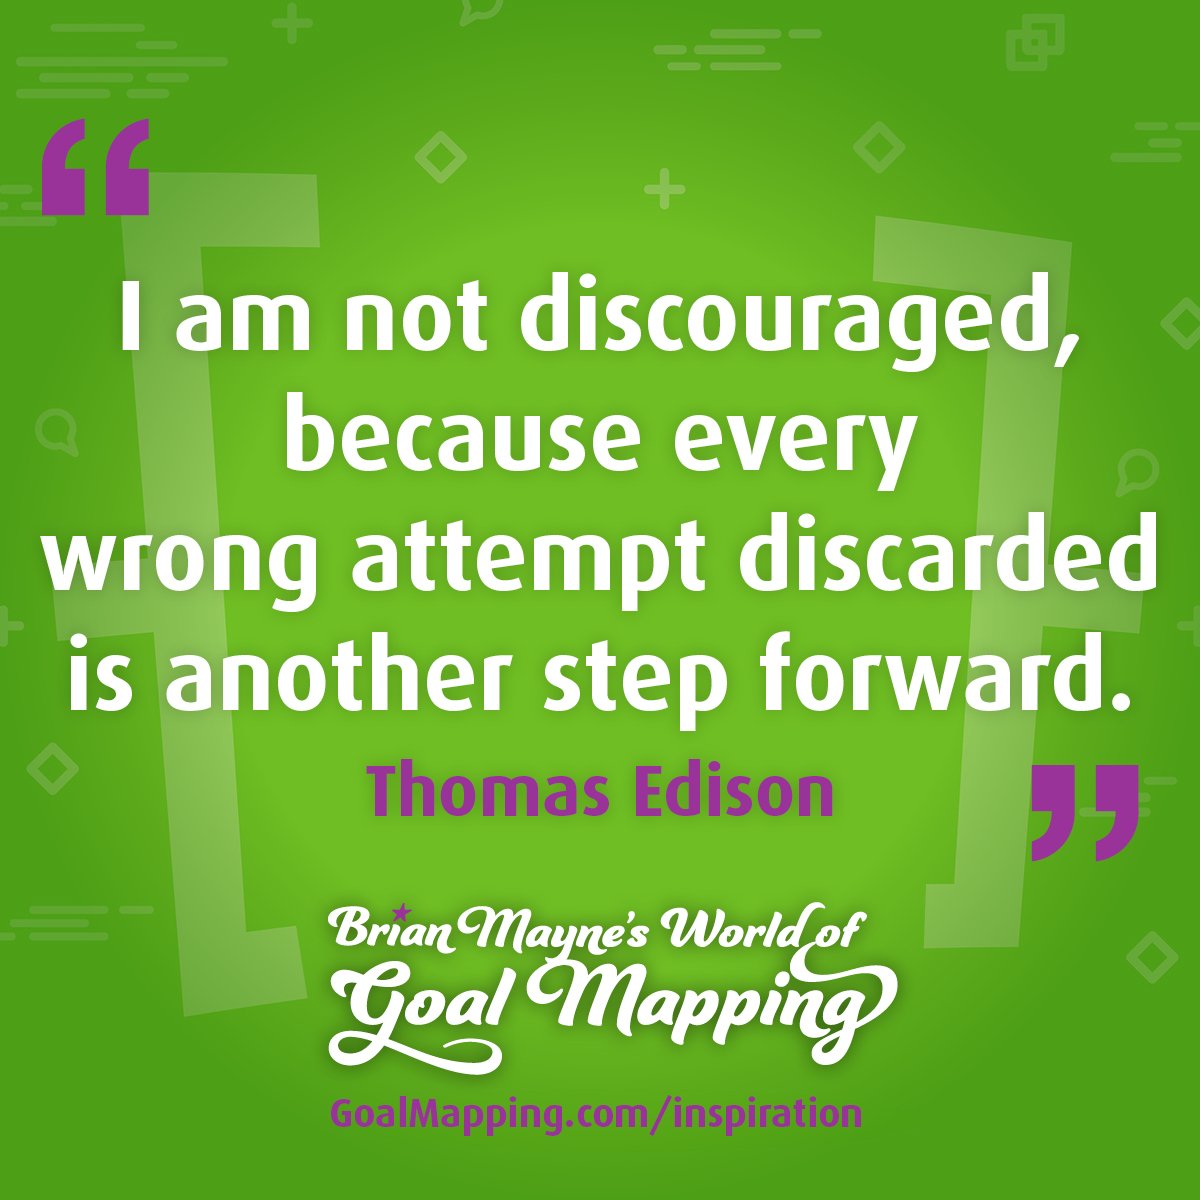 "I am not discouraged, because every wrong attempt discarded is another step forward." Thomas Edison